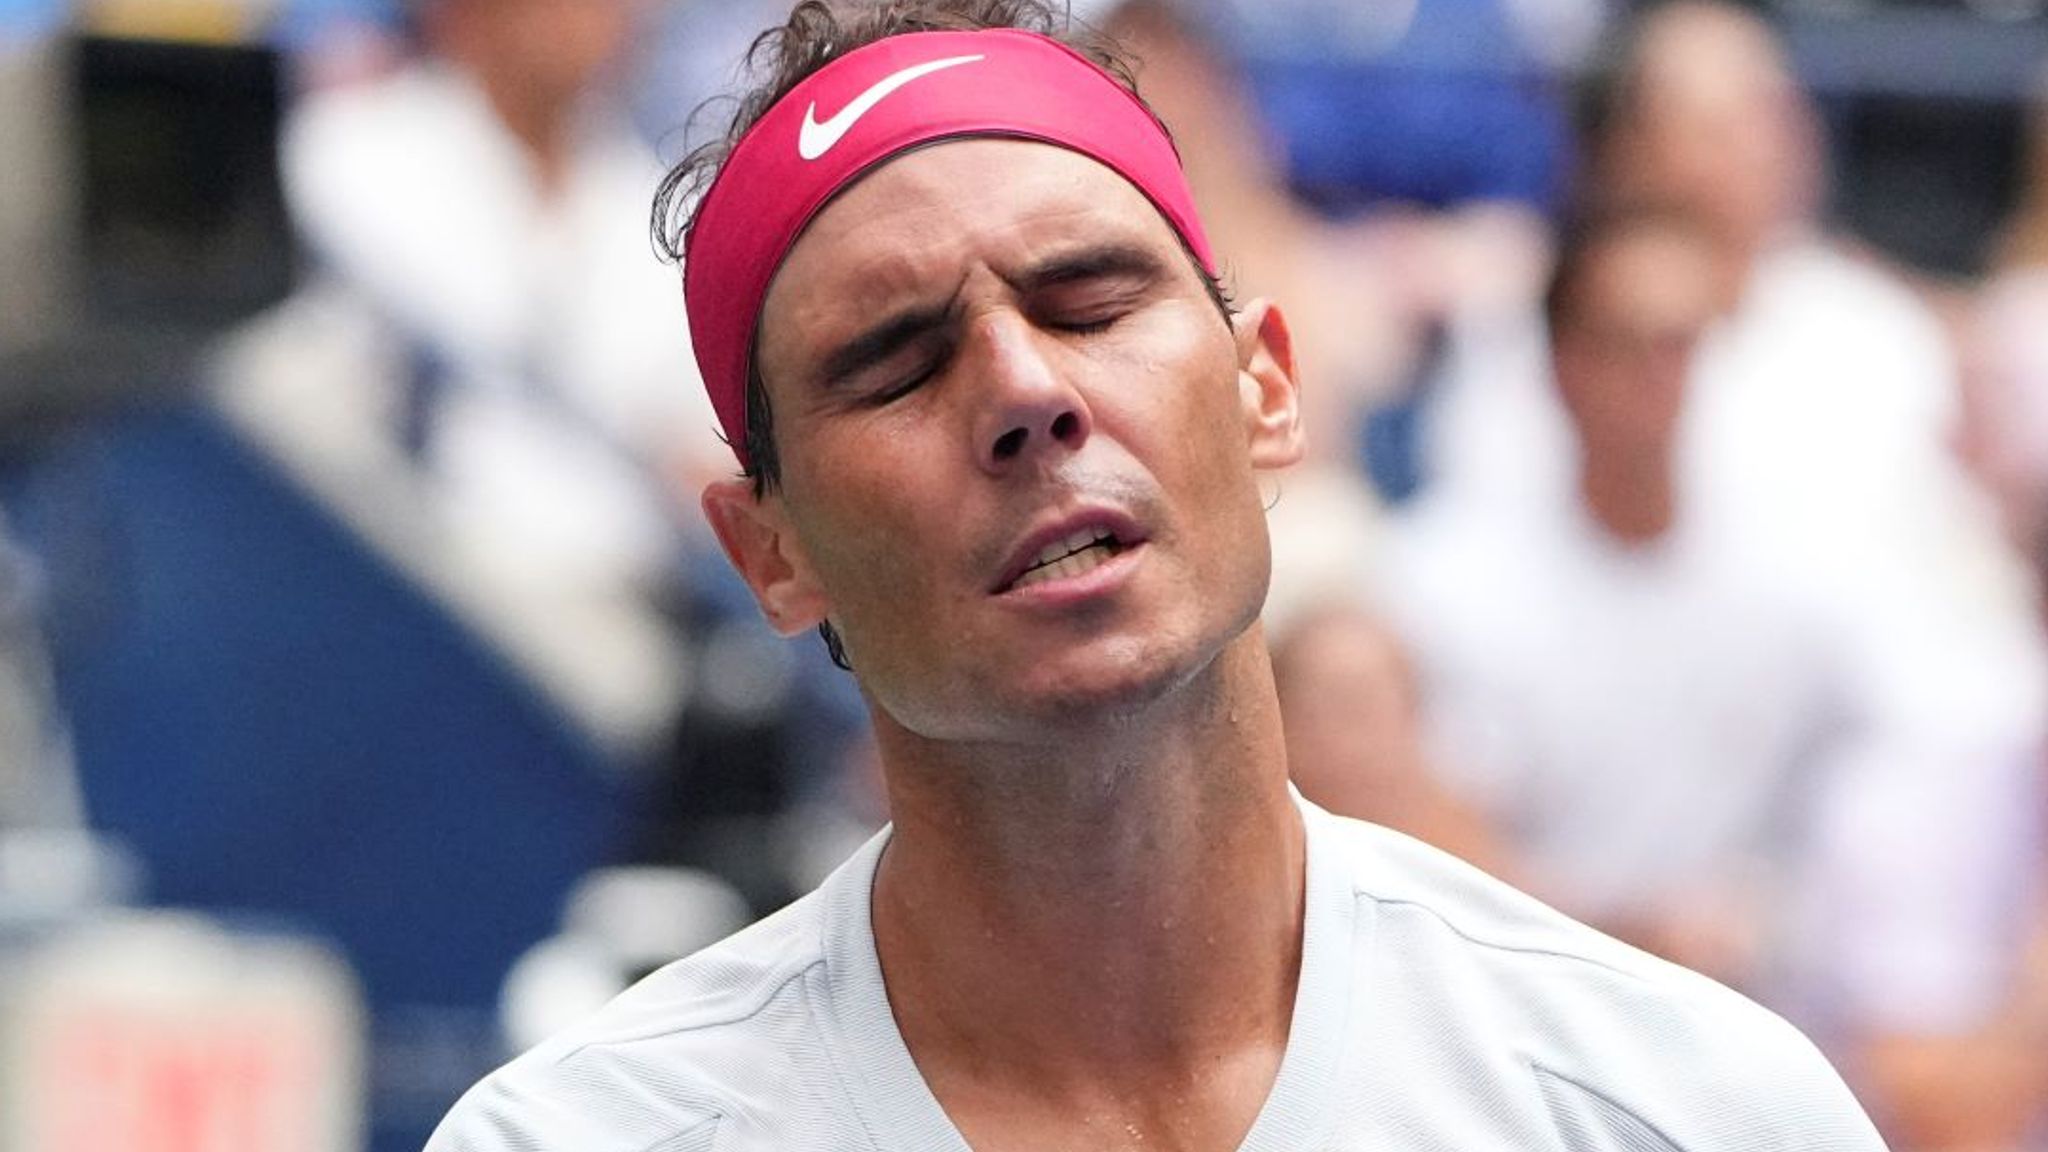 US Open Rafael Nadal knocked out by Frances Tiafoe in last-16 thriller in New York Tennis News Sky Sports